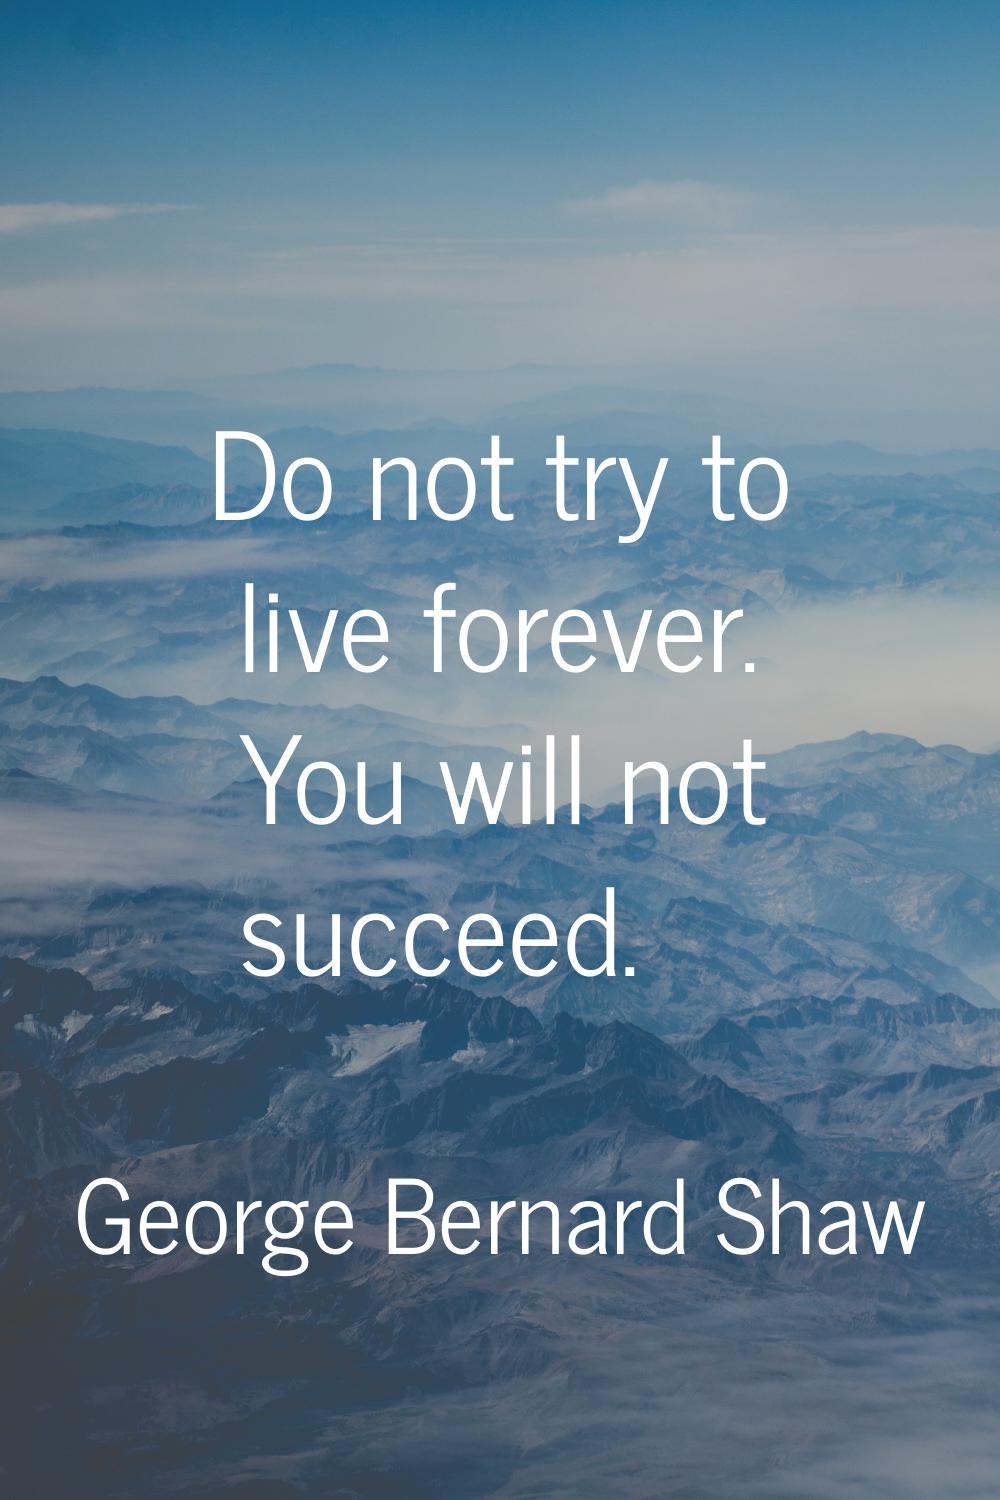 Do not try to live forever. You will not succeed.